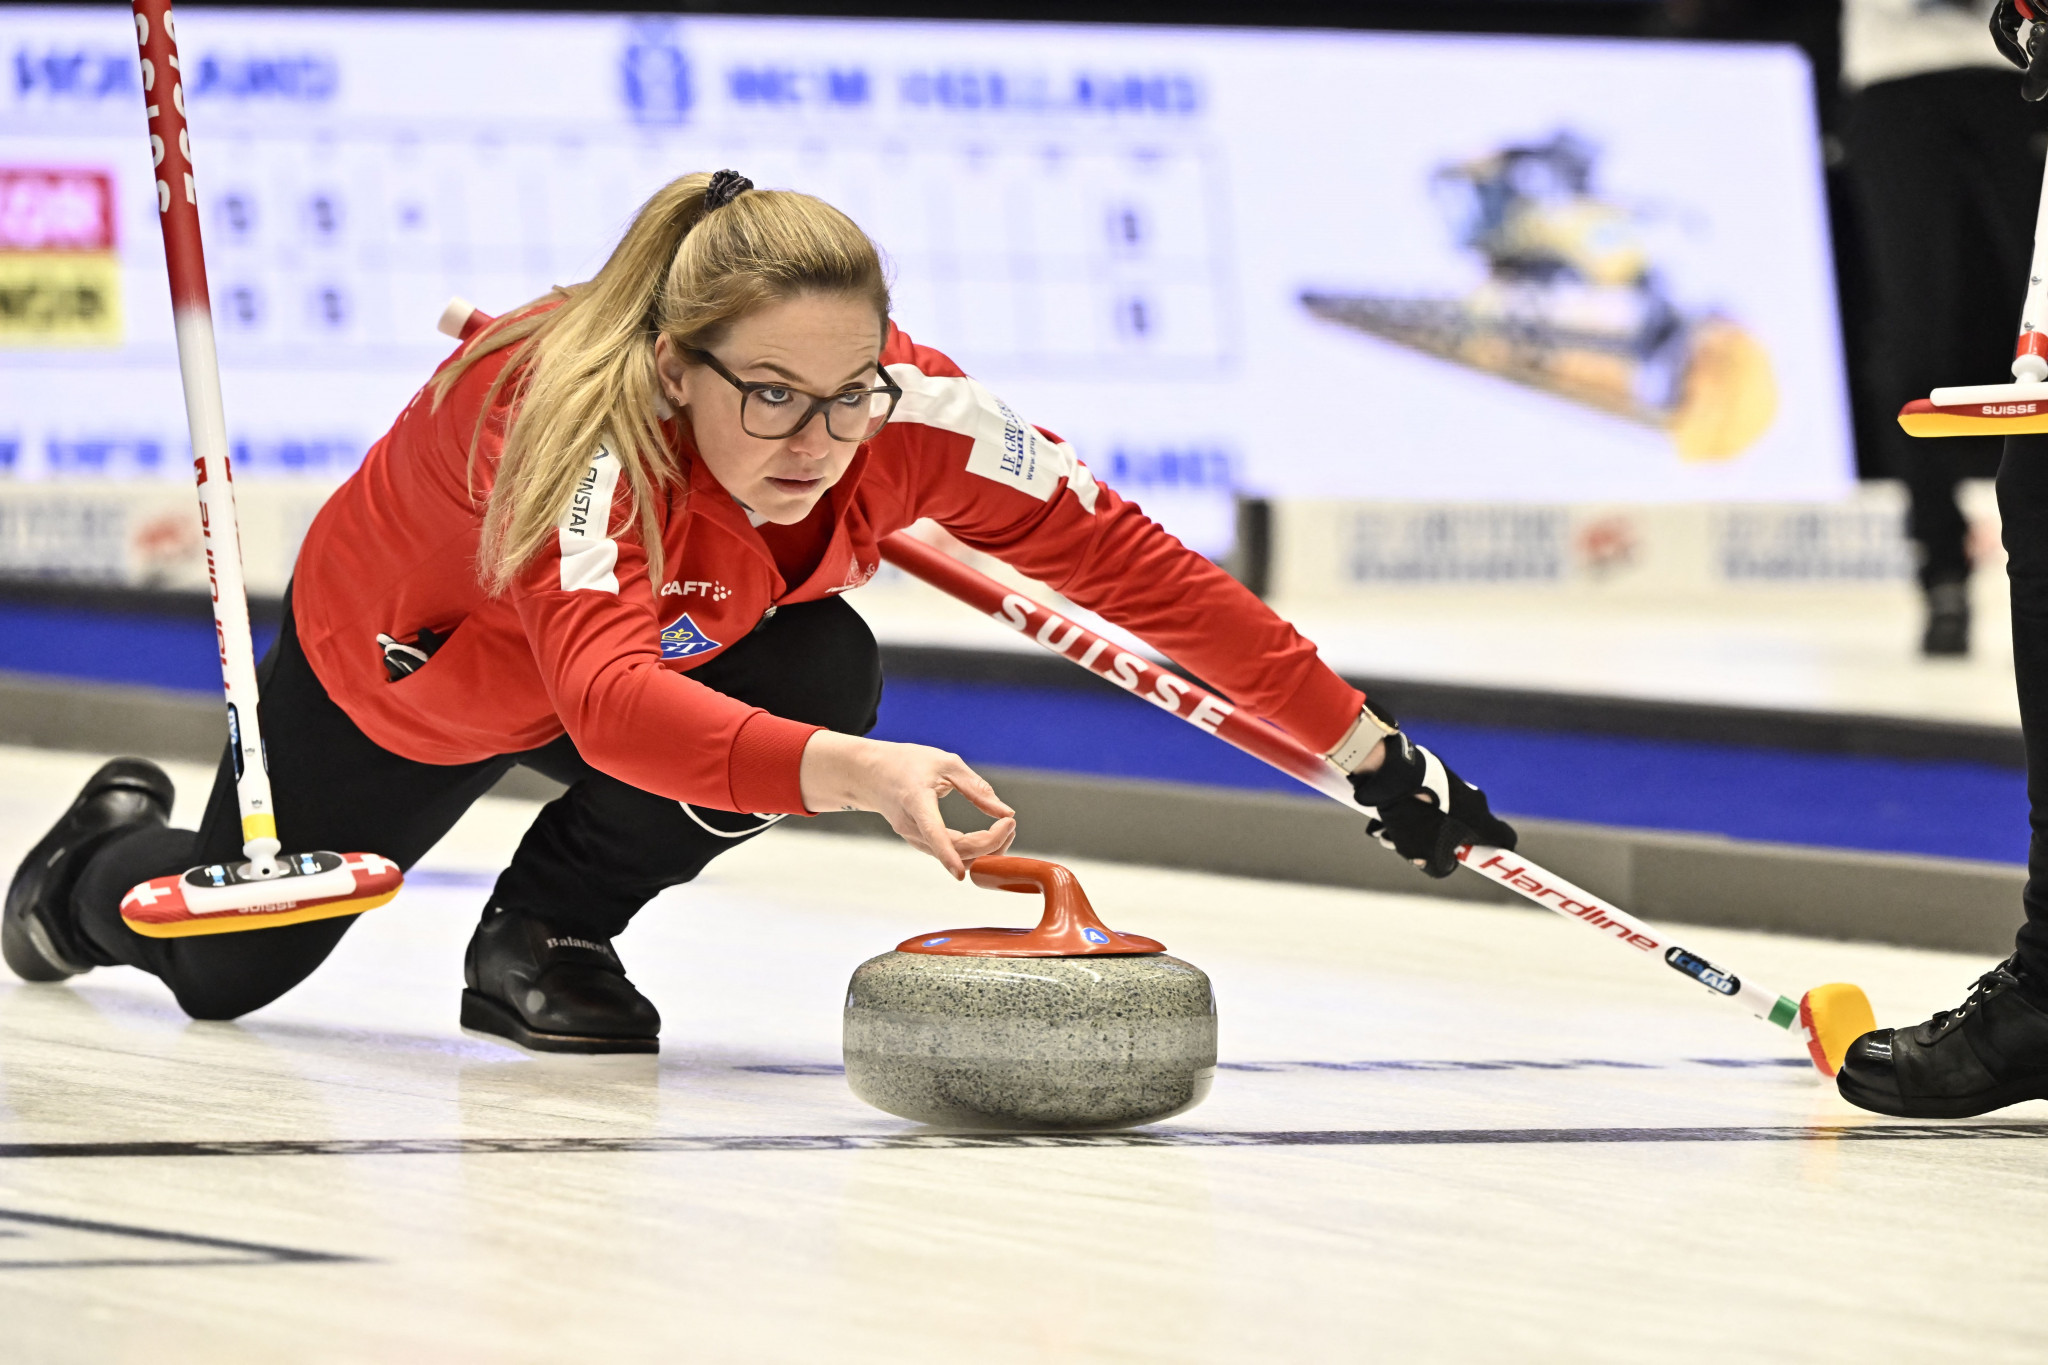 Holders Switzerland continue to impress with two more wins at World Women’s Curling Championship